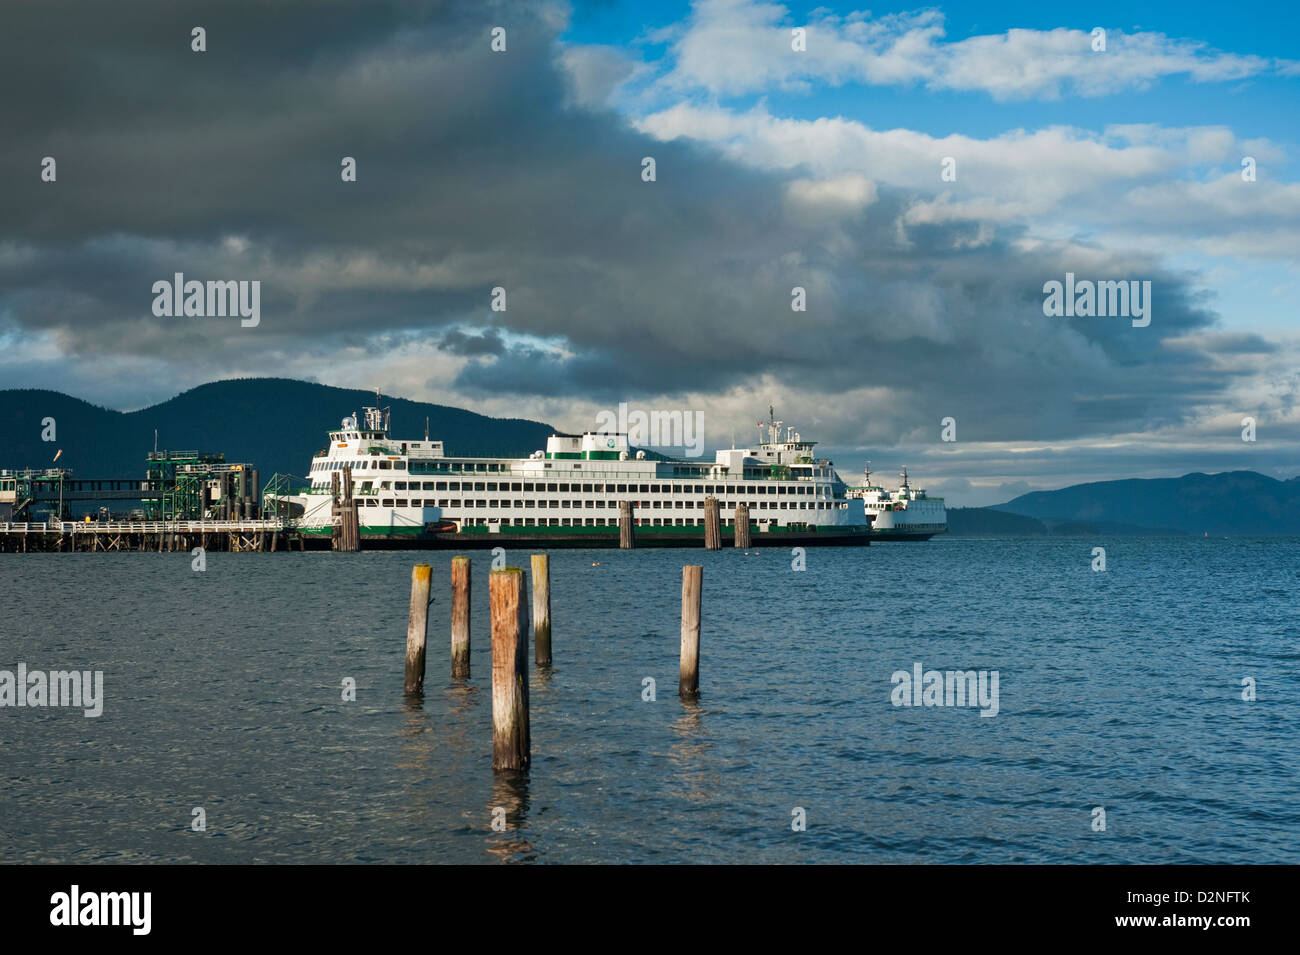 A Washington State Ferry docks in Anacortes, Washington, before heading to Friday Harbor on San Juan Island in the Puget Sound. Stock Photo